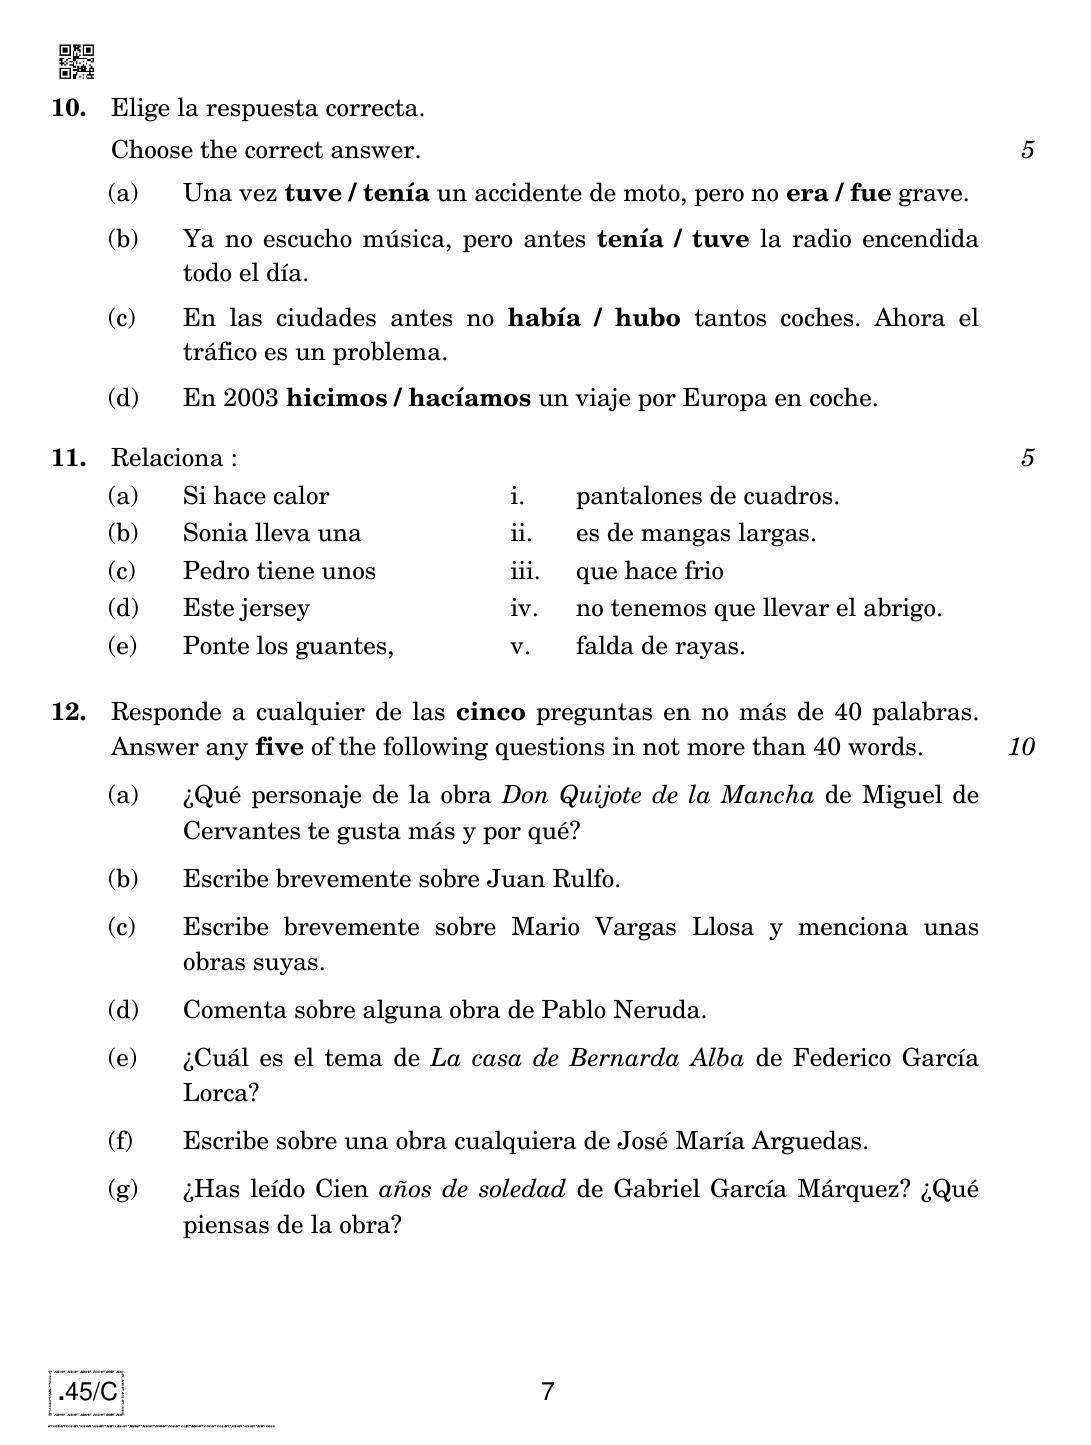 CBSE Class 10 Spanish 2020 Compartment Question Paper - Page 7